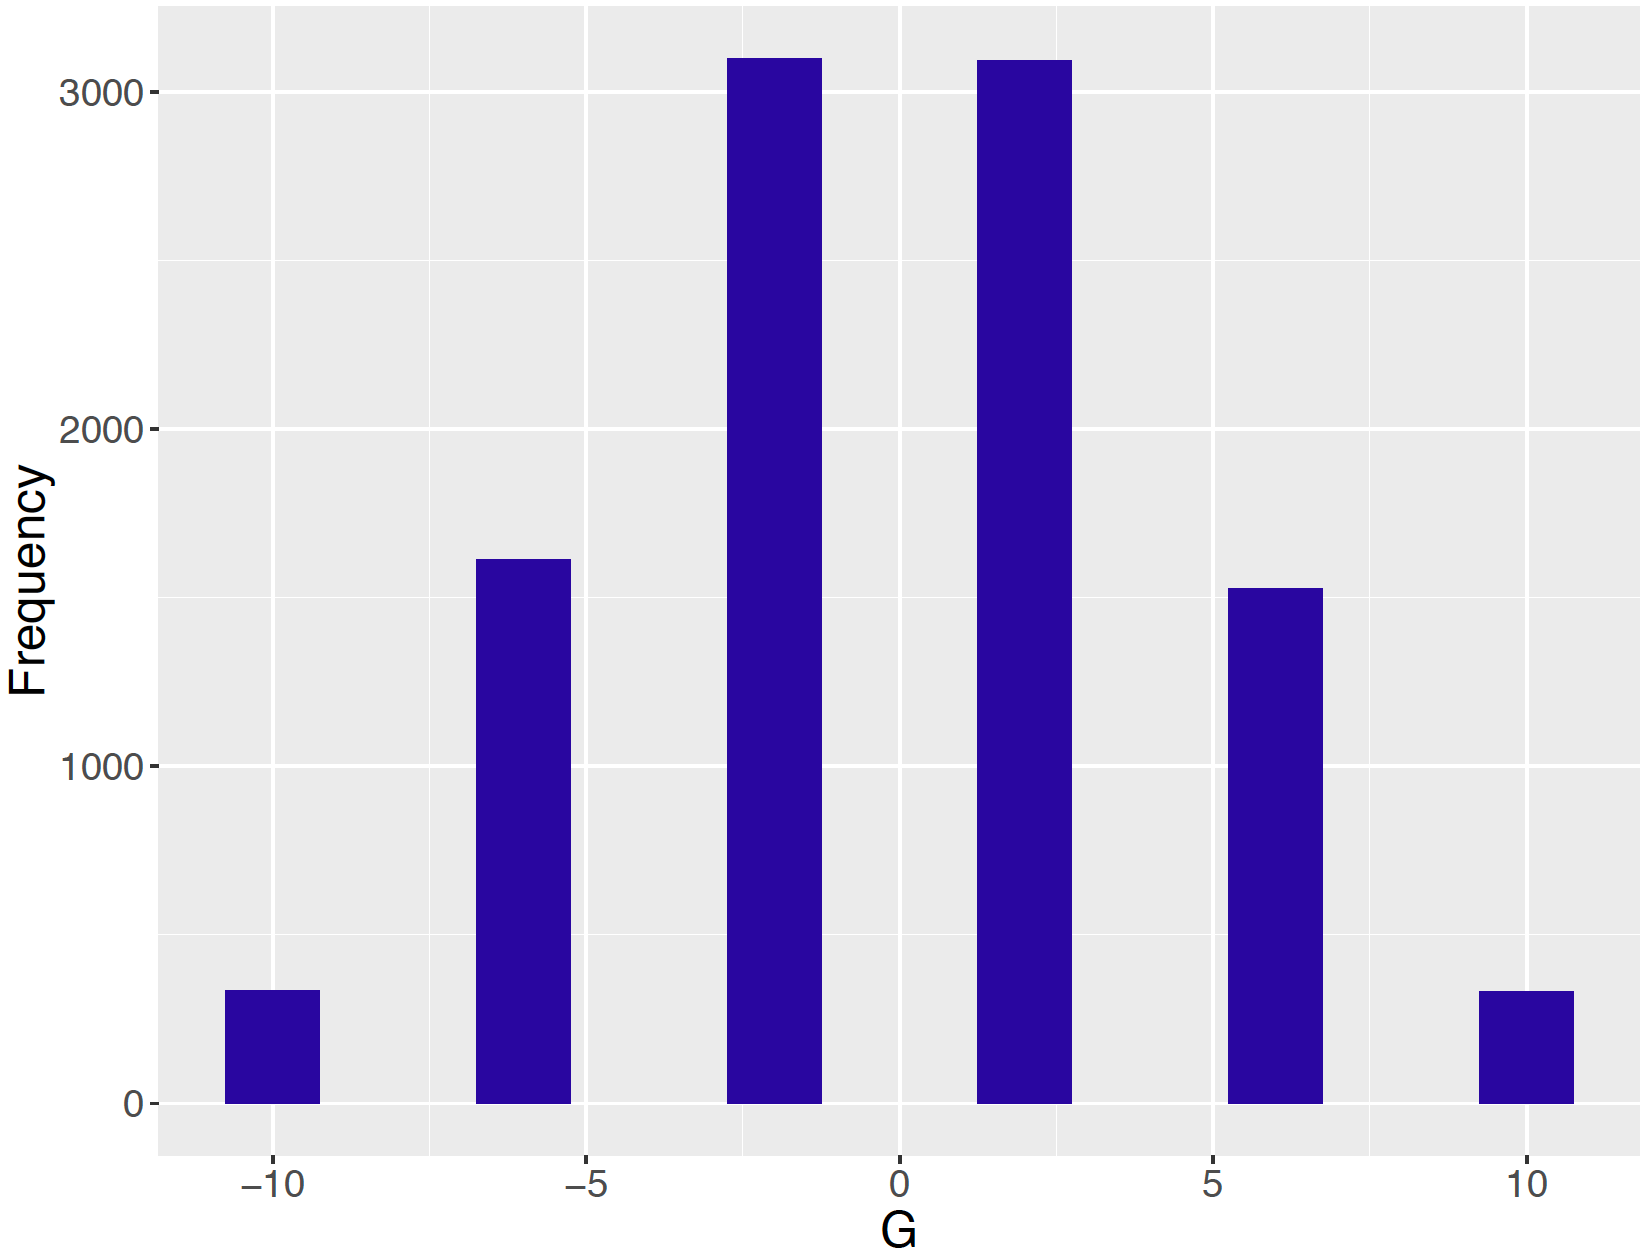 Bar graph of net gains from simulation of Peter-Paul game.